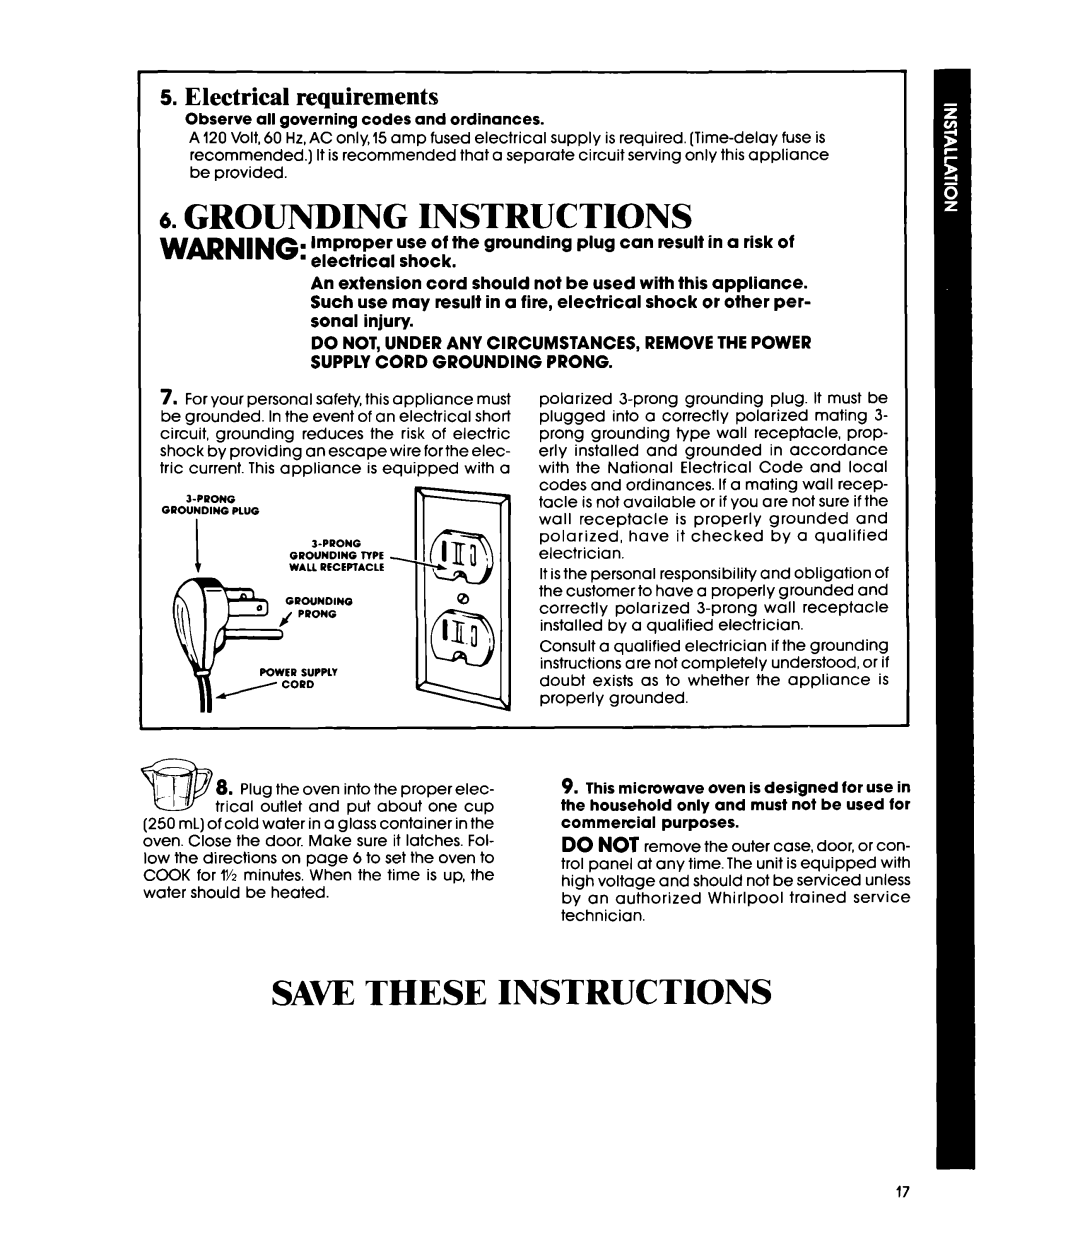 Whirlpool MW85OOXP, MW850EXP manual Grounding Instructions, Saw These Instructions, Electrical requirements 